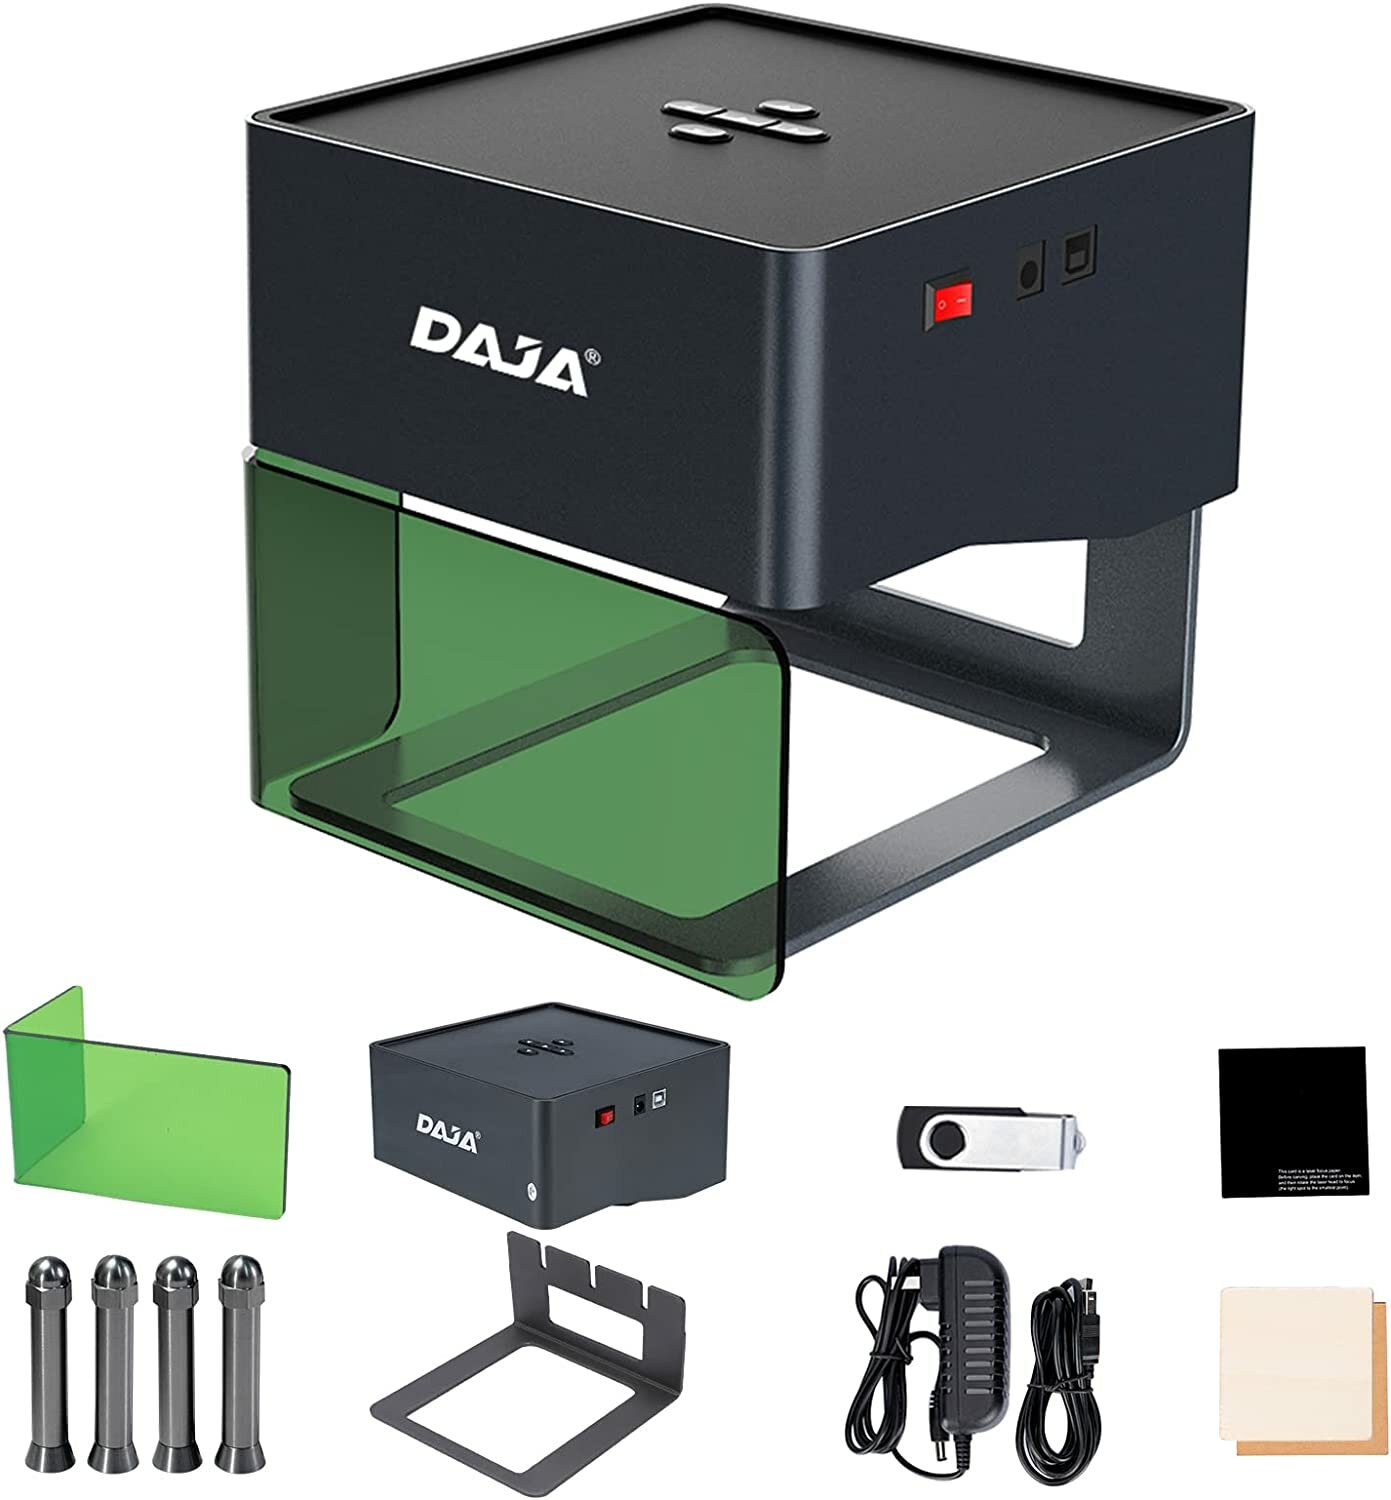 Image of DAJA DJ6 Laser Engraver with Higher Columns Portable Laser Engraving Machine Kits for DIY Supports Win/Mobile System/Off